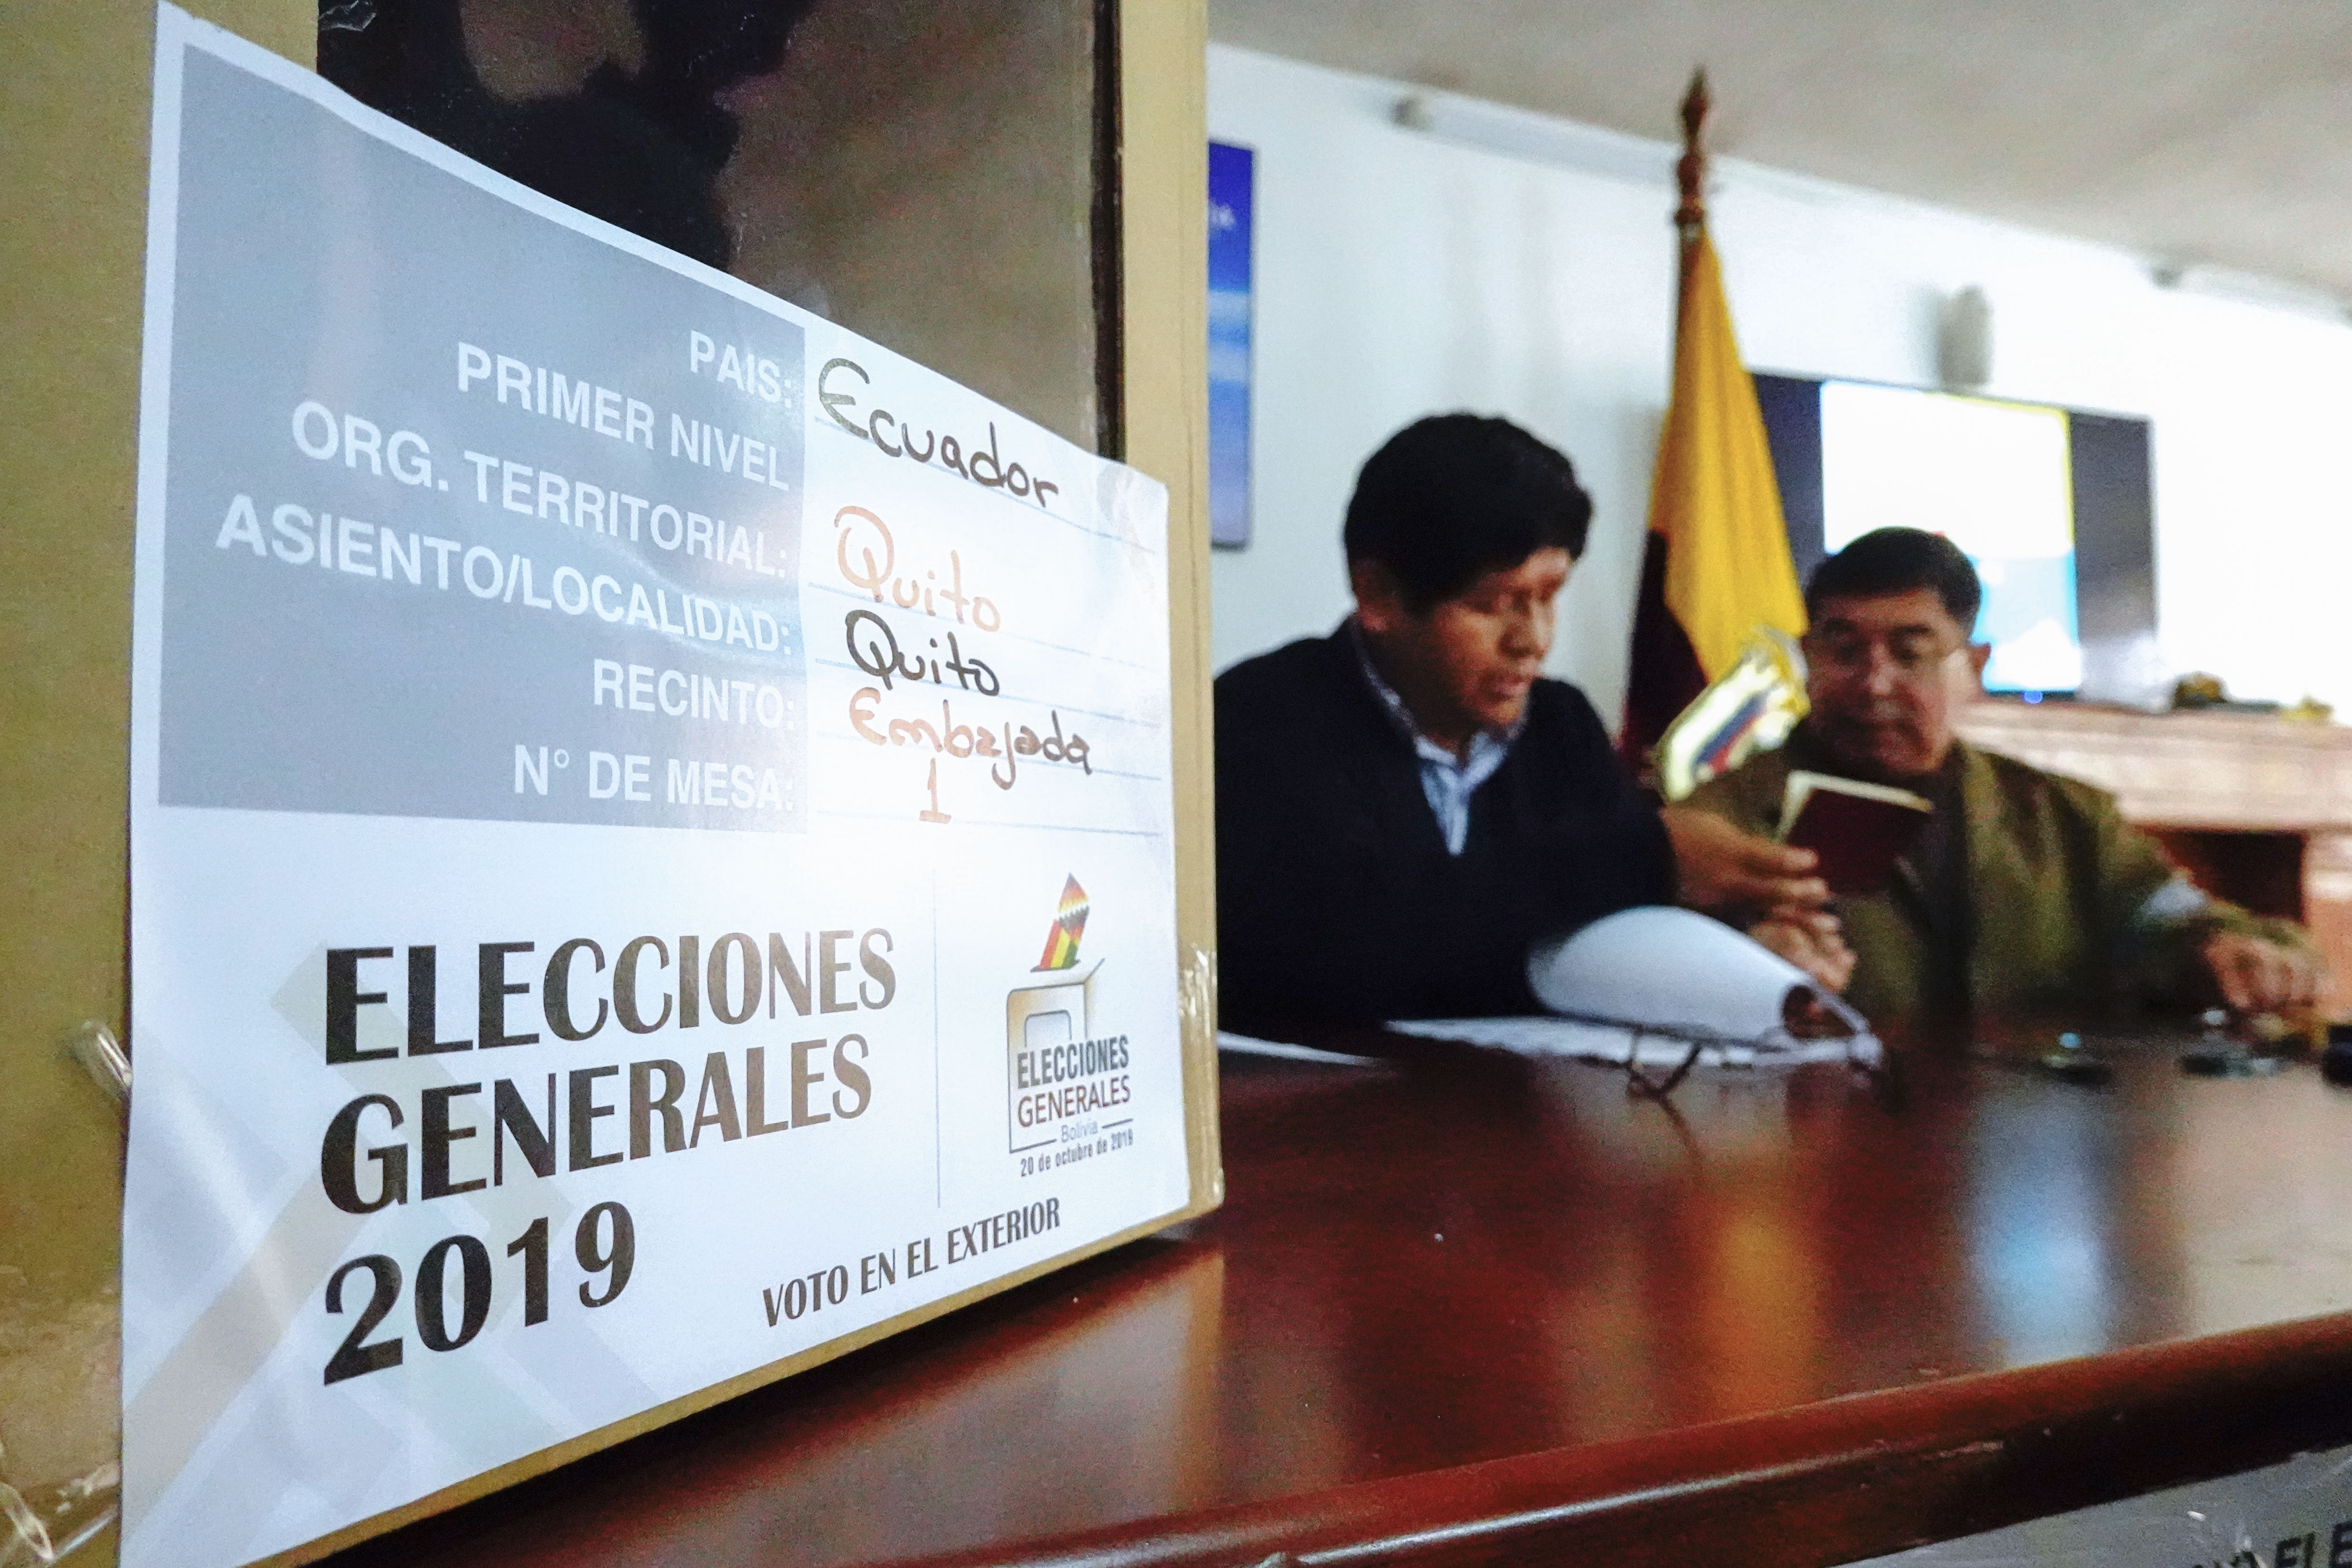 A Bolivian citizen residing in Ecuador prepares to vote during Bolivian presidential elections in Quito, on October20, 2019. - Polls opened in Bolivia Sunday with Evo Morales vying for a controversial fourth term as the country's first indigenous president amid allegations of corruption and authoritarianism. (Photo by RODRIGO BUENDIA / AFP) (Photo by RODRIGO BUENDIA/Afp/AFP via Getty Images)